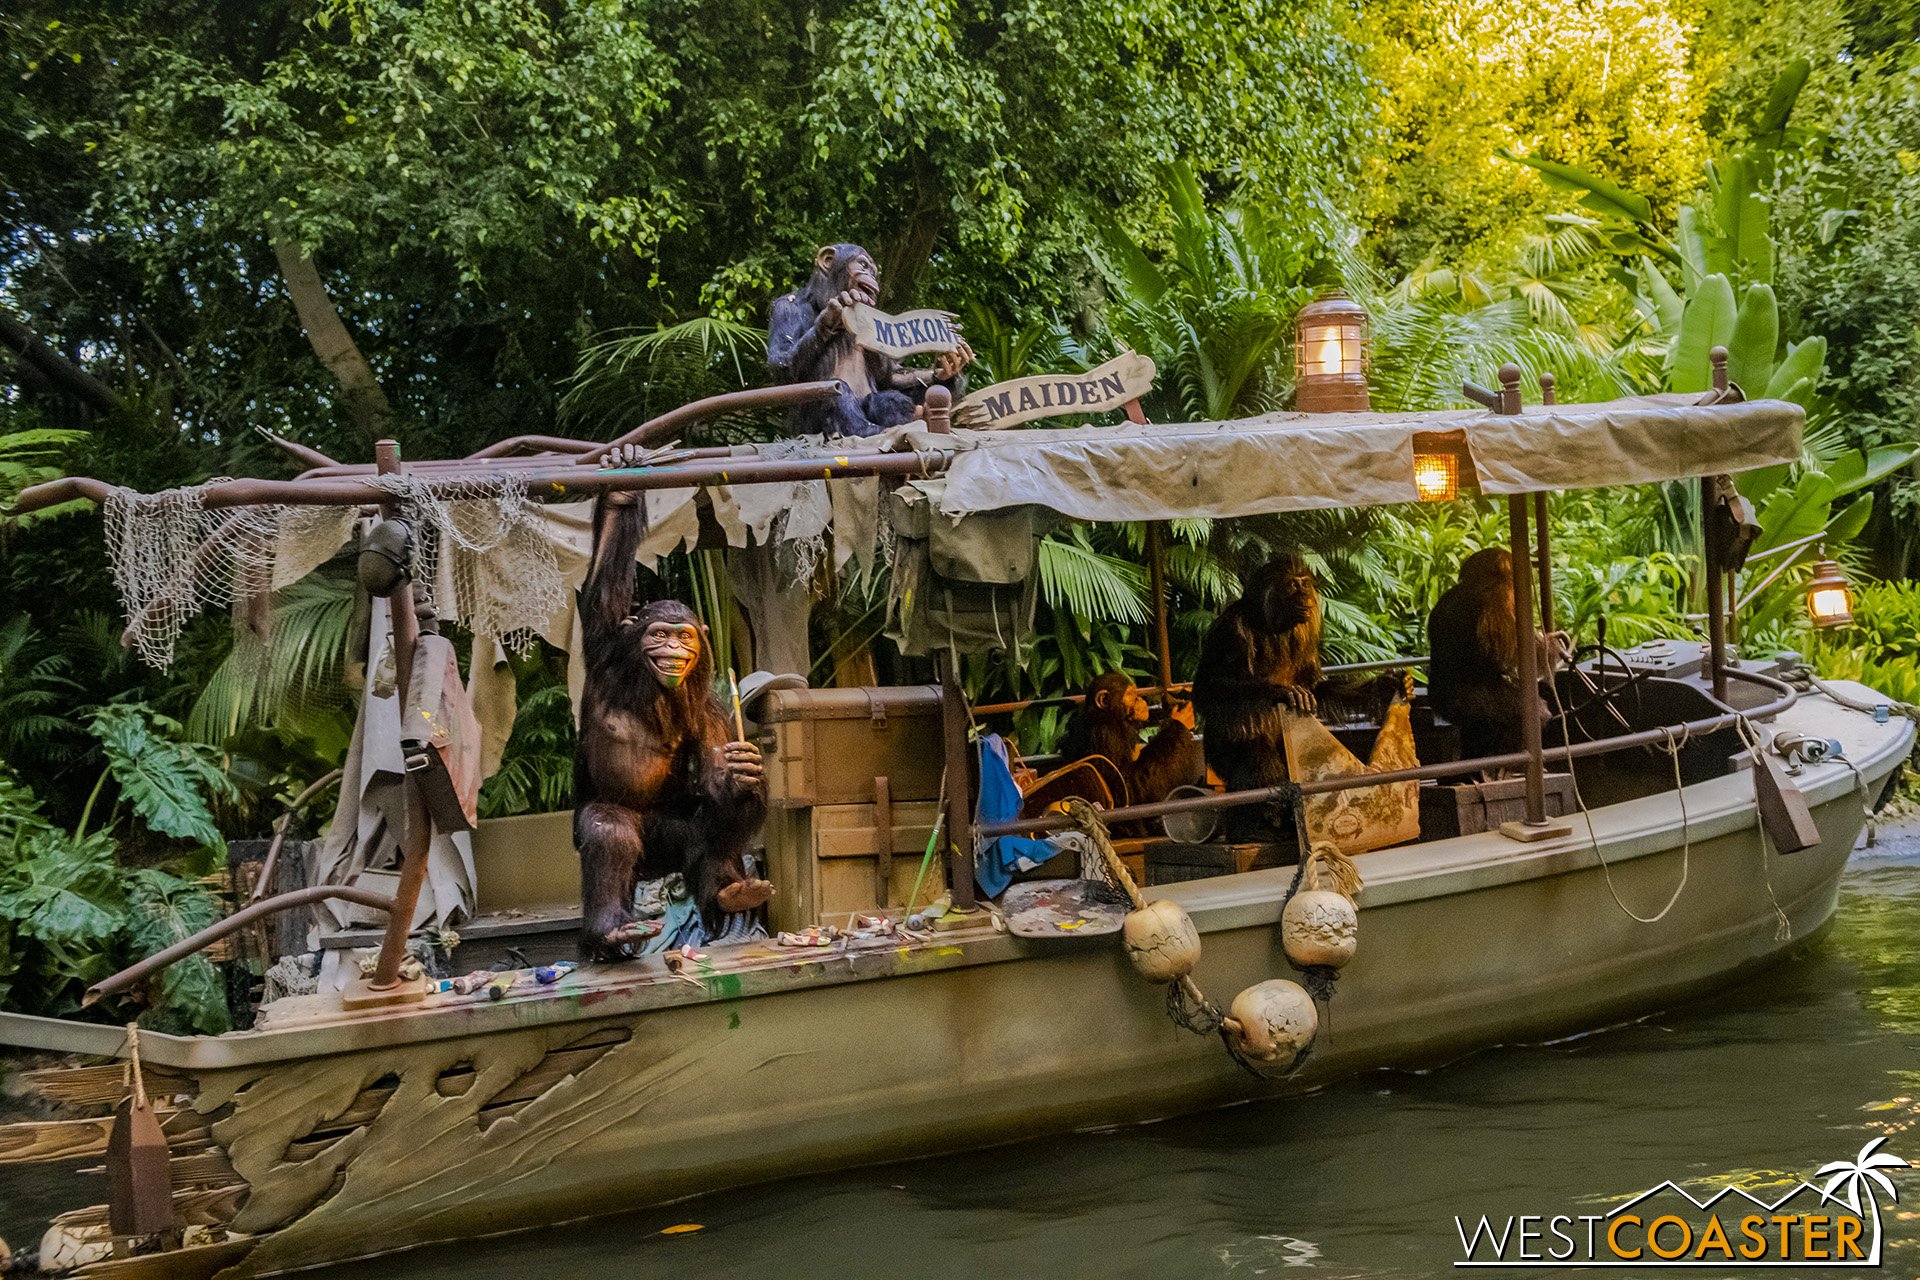  In front of where the dancing natives used to be located, a group of monkeys have taken over the Mekong Maiden. 